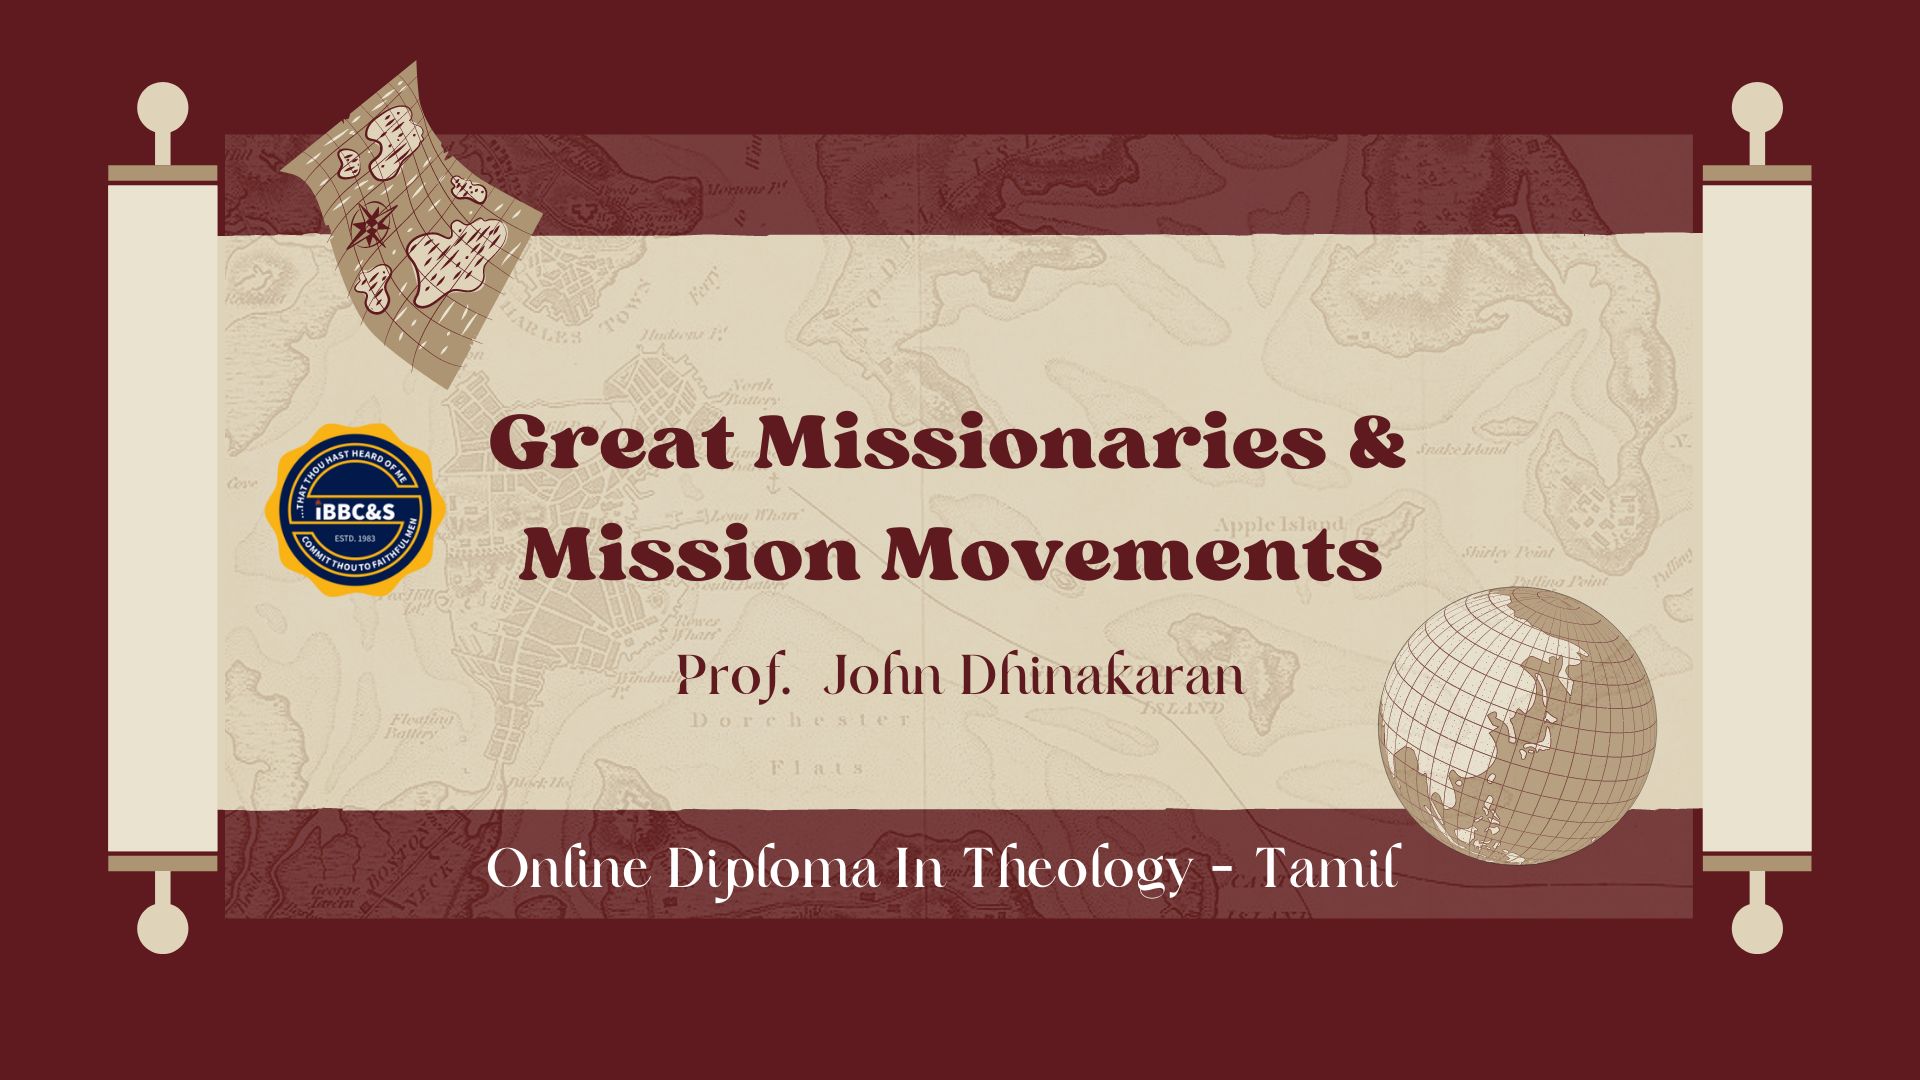 Great Missionaries & Mission Movements